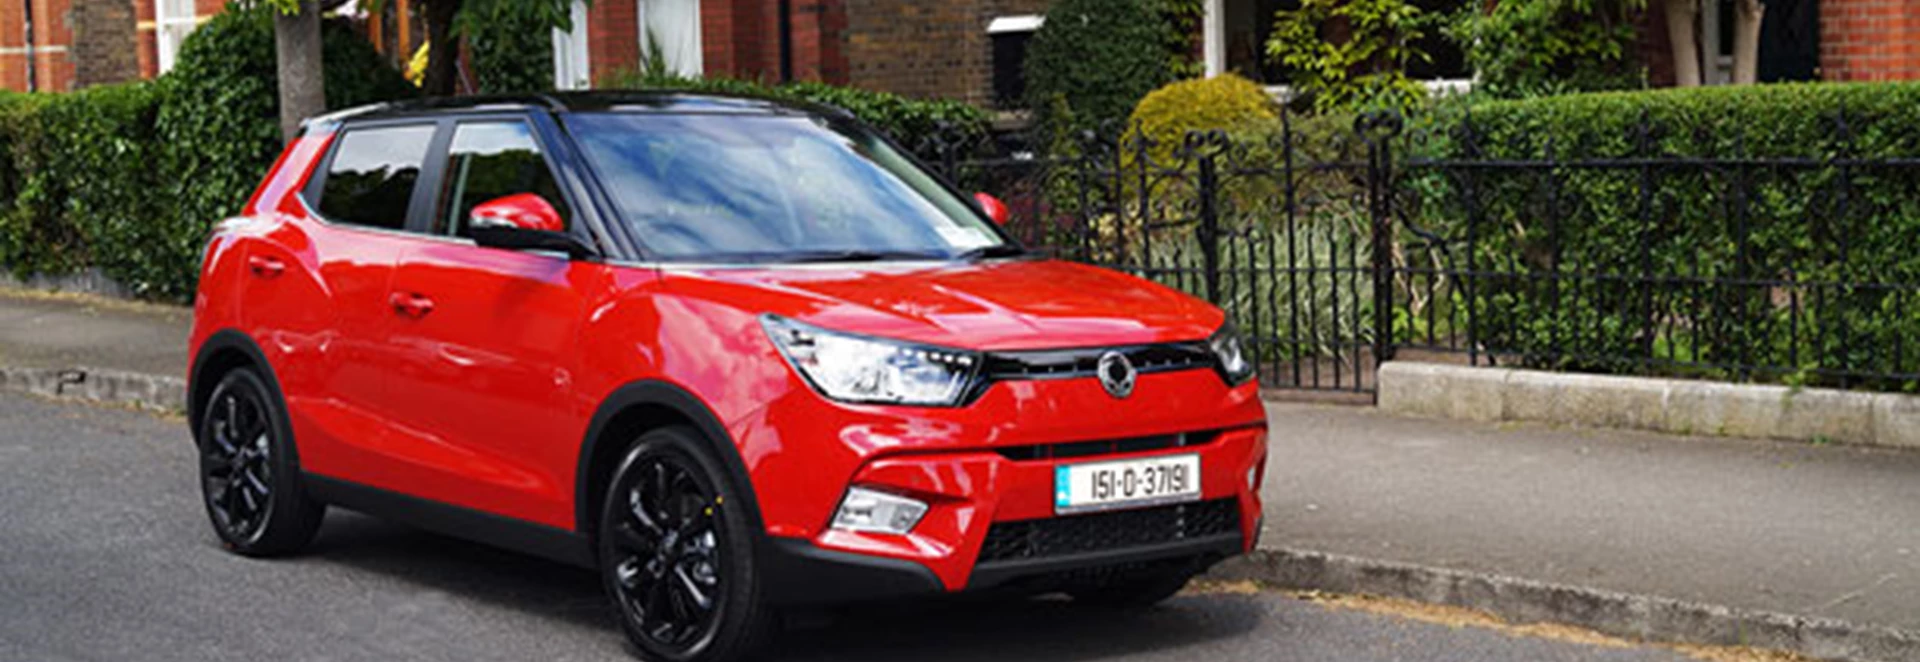 SsangYong Tivoli XLV gets safety and practicality updates 